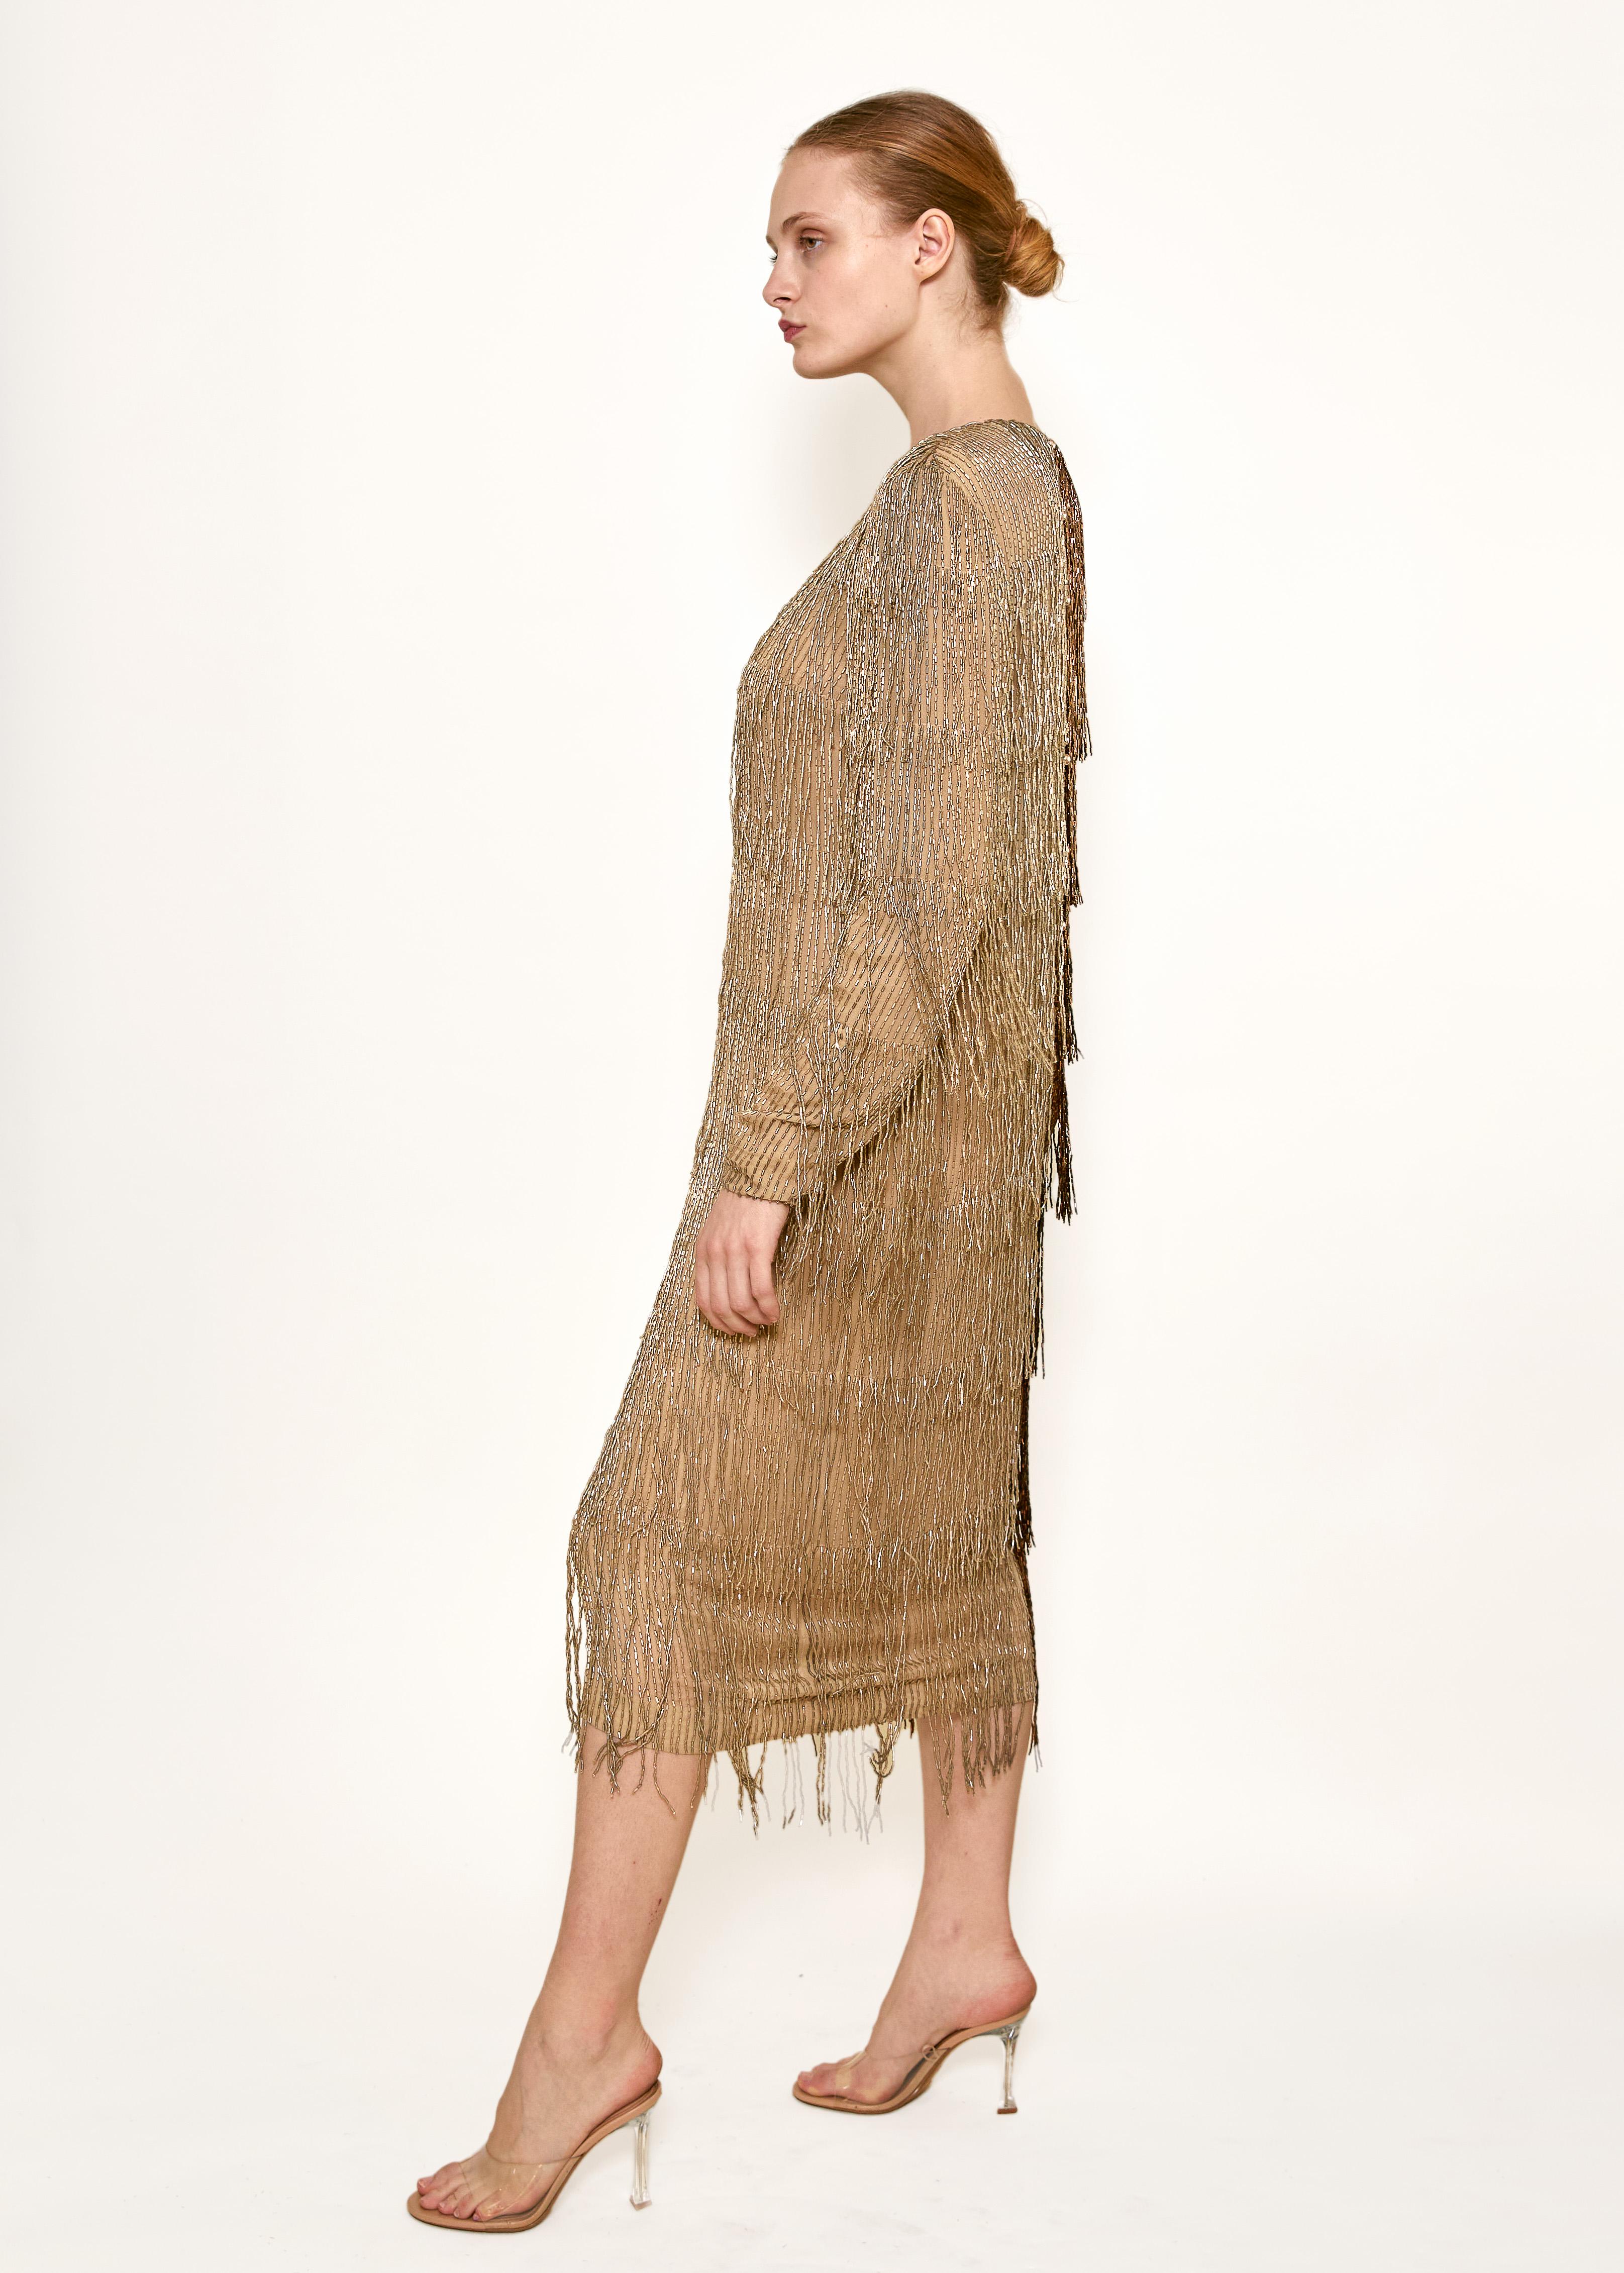 Bill Blass Fall 1984 Beaded Fringe Bronze & Gold Cocktail Dress In Fair Condition For Sale In Los Angeles, CA